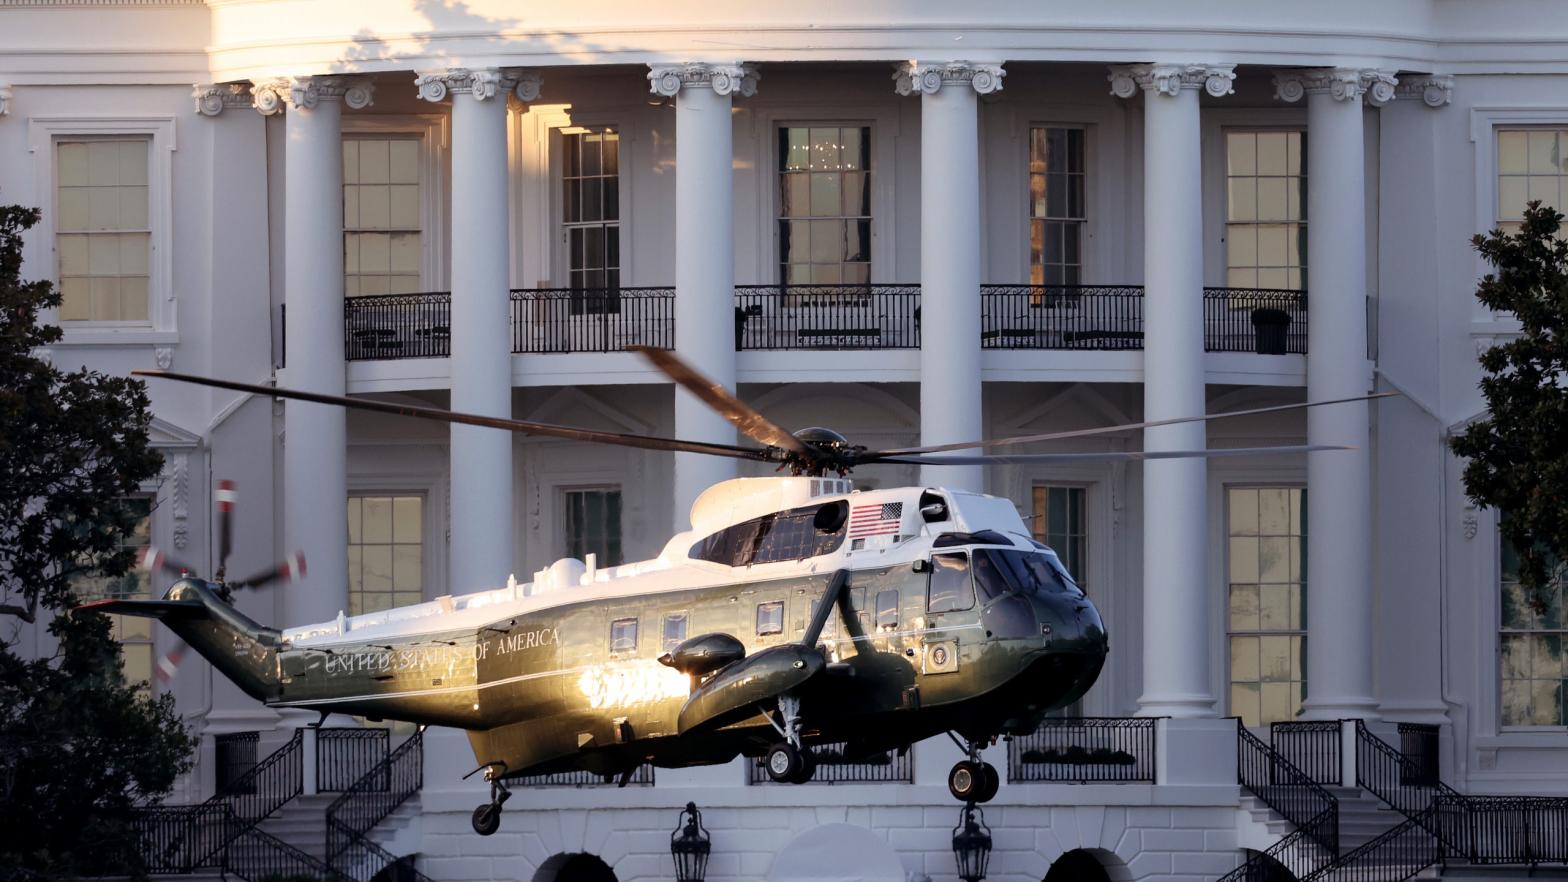 Marine One, the presidential helicopter, carries U.S. President Donald Trump away from the White House on the way to Walter Reed National Military Medical Centre on October 2, 2020 in Washington, D.C. (Image: Win McNamee, Getty Images)